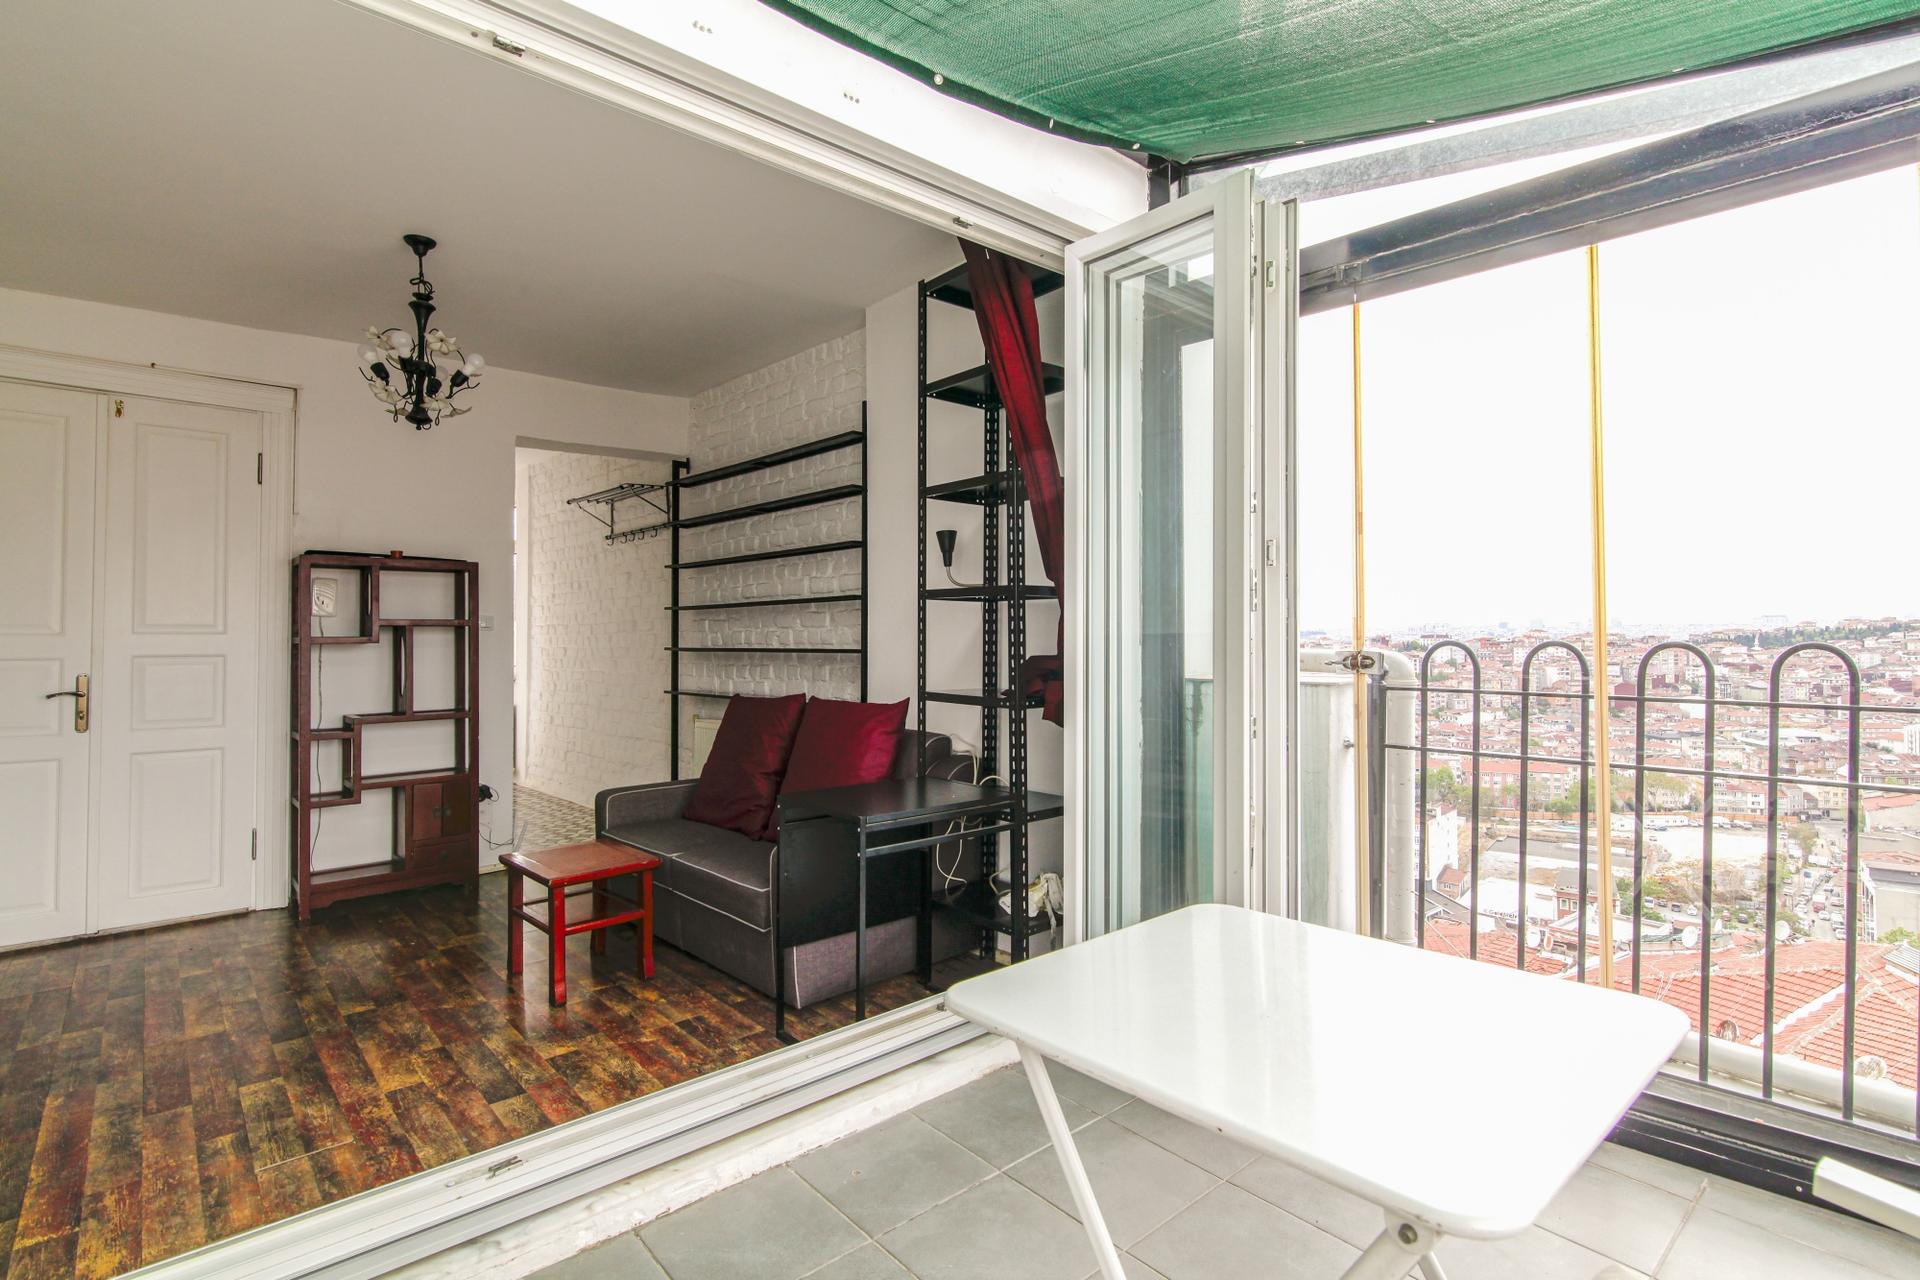 You can admire the wonderful view of Beyoglu from the large balcony of the living room.